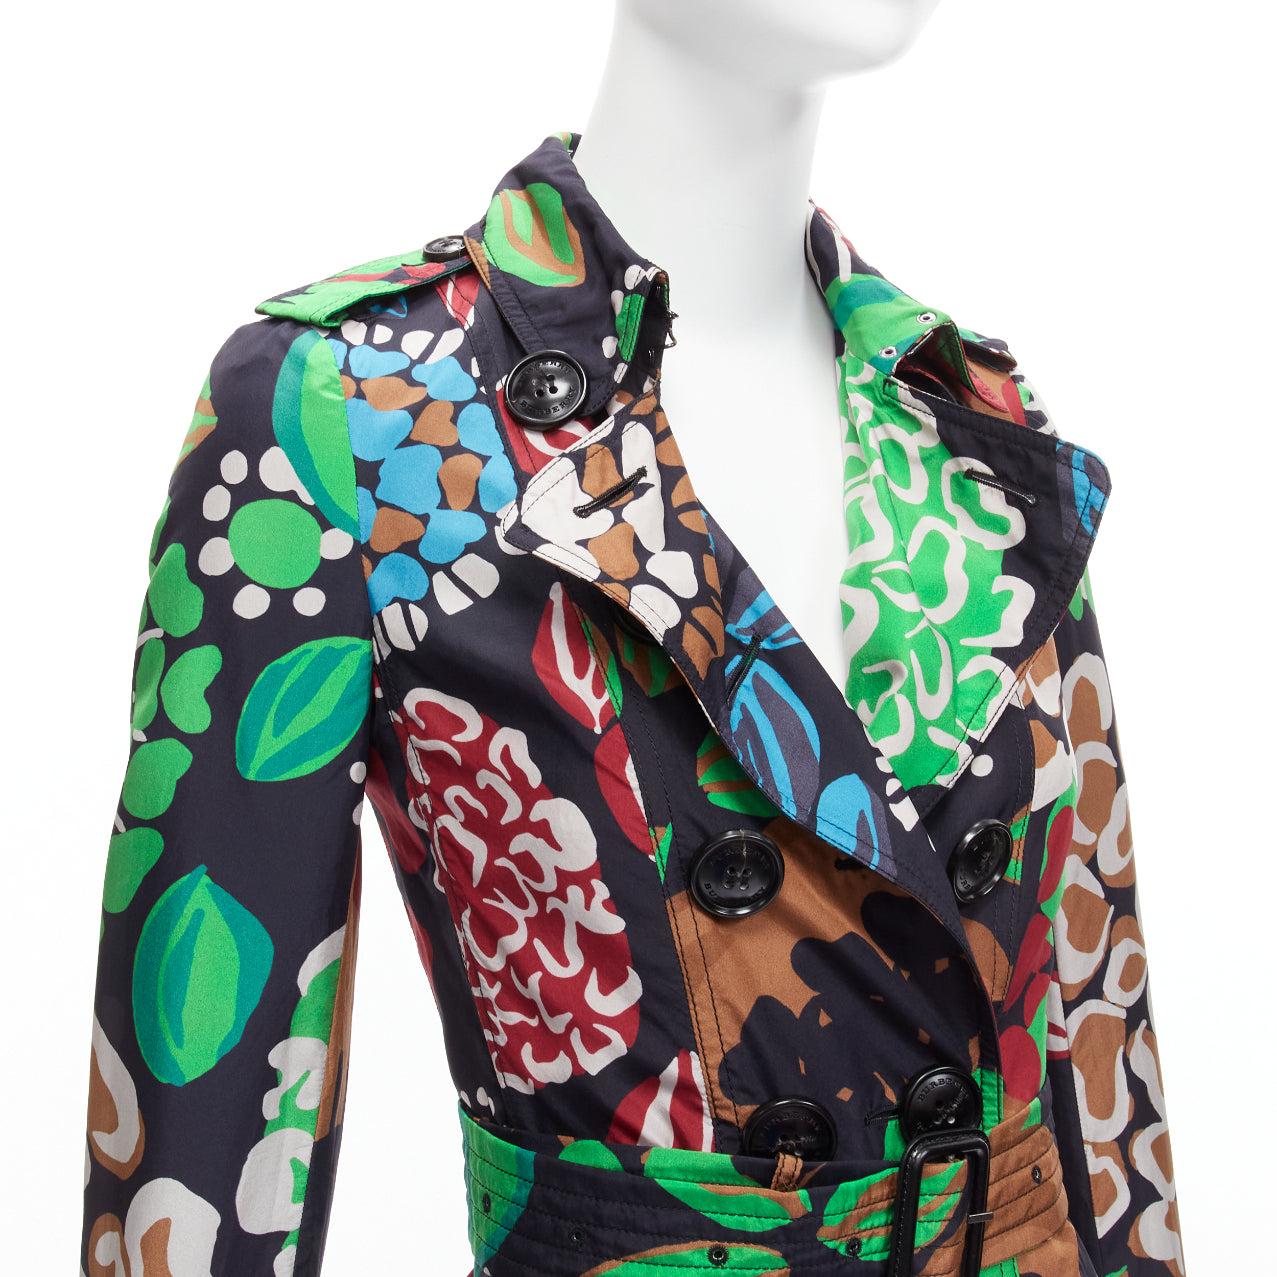 BURBERRY PRORSUM Runway 100% silk tropical floral print belted trench coat UK2 XXS
Reference: TGAS/D00658
Brand: Burberry
Collection: Prorsum - Runway
Material: Silk
Color: Multicolour
Pattern: Floral
Closure: Button
Lining: Multicolour Silk
Extra